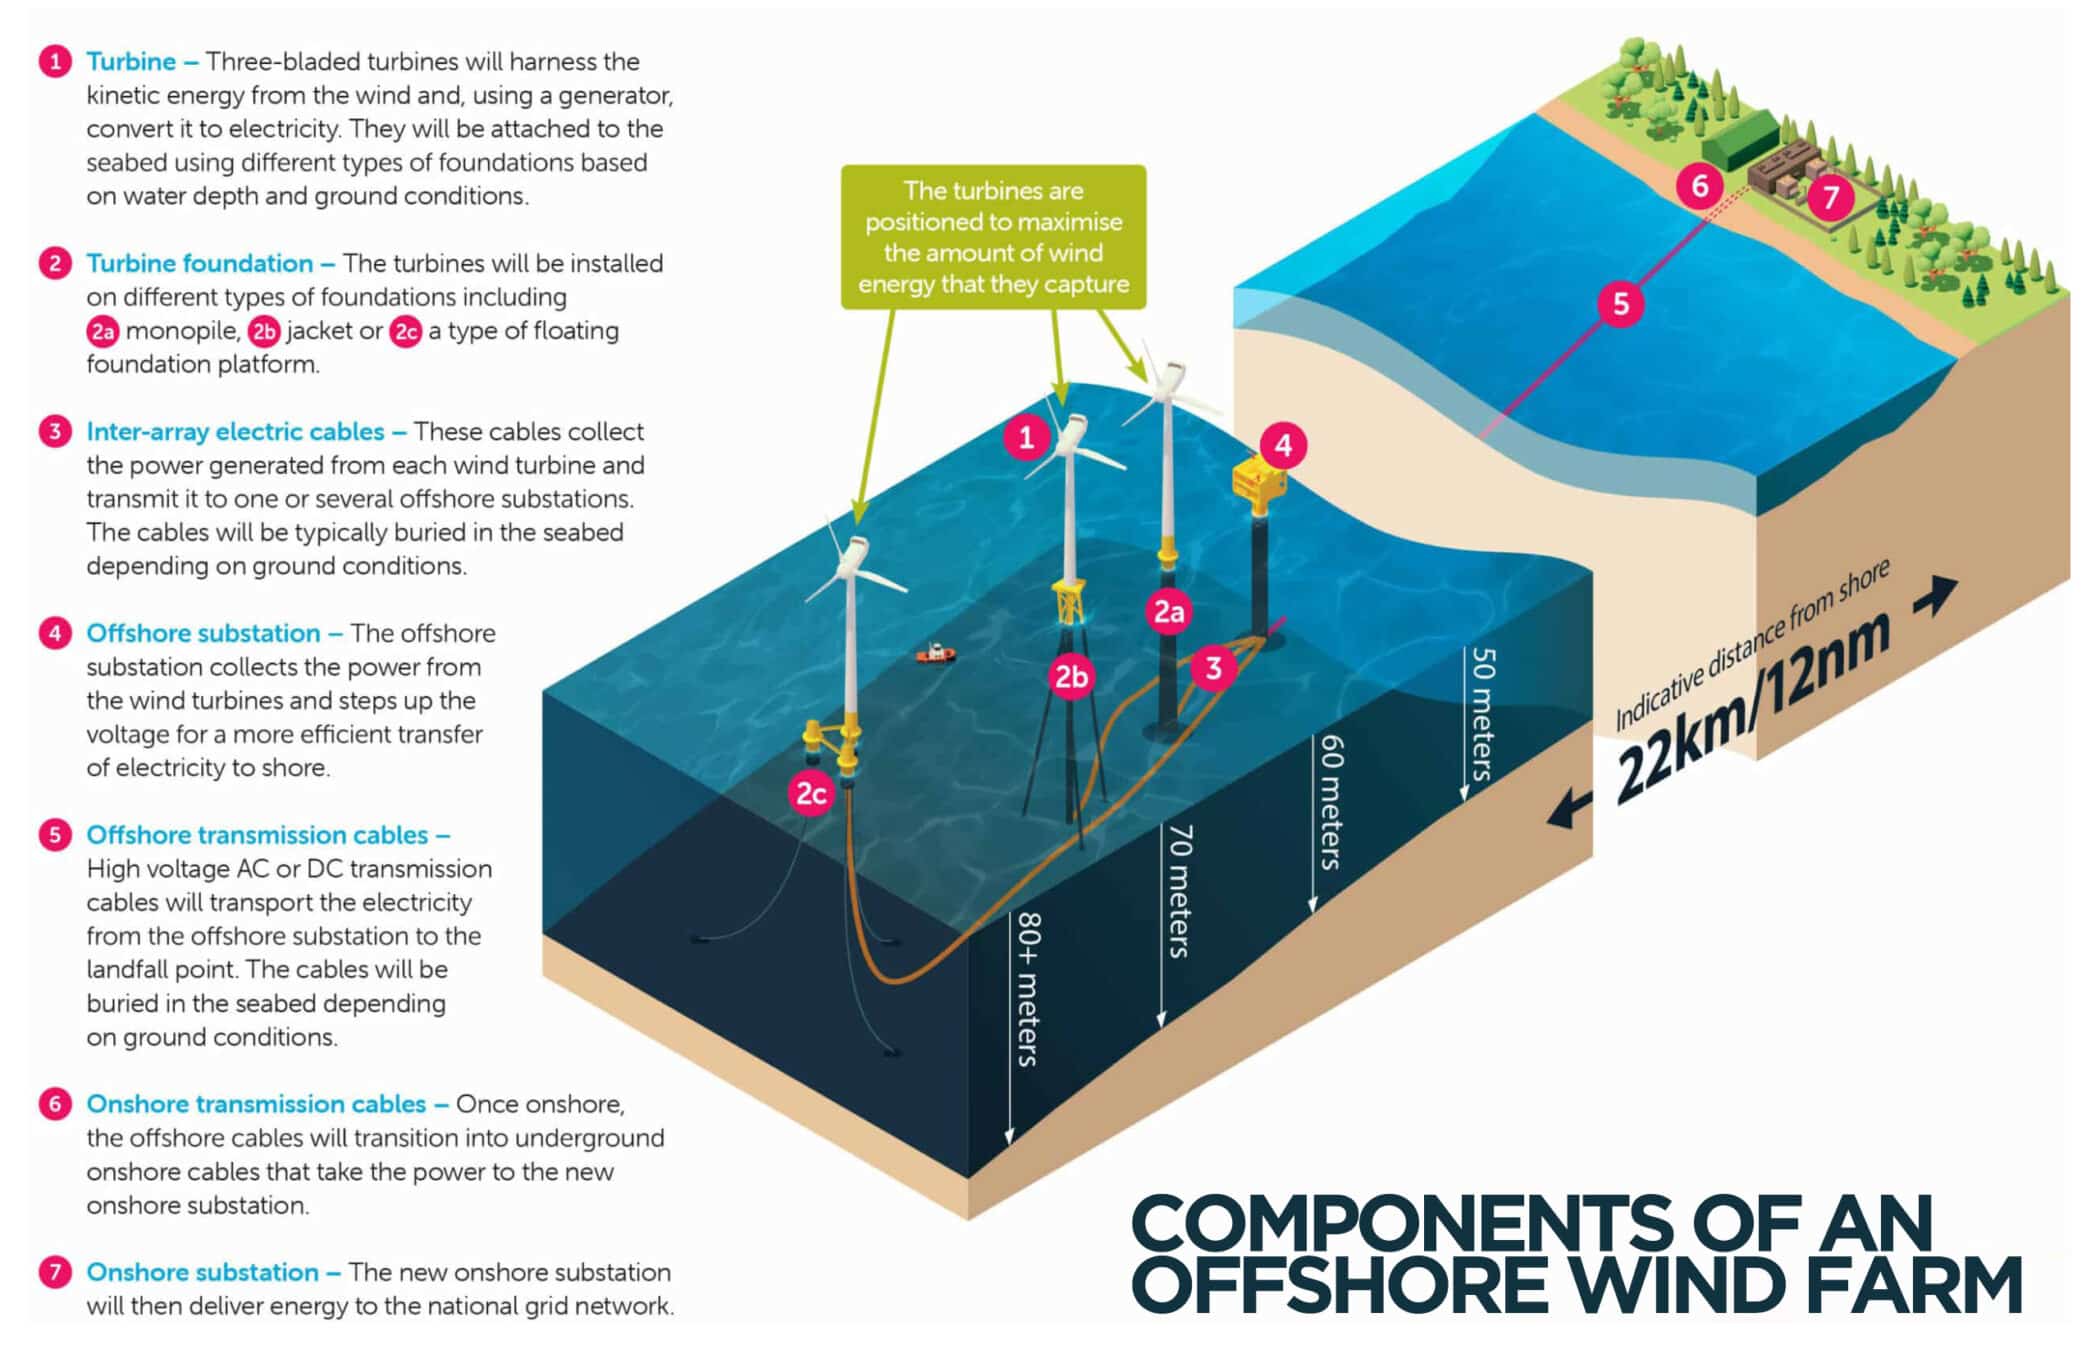 Components of an offshore wind farm